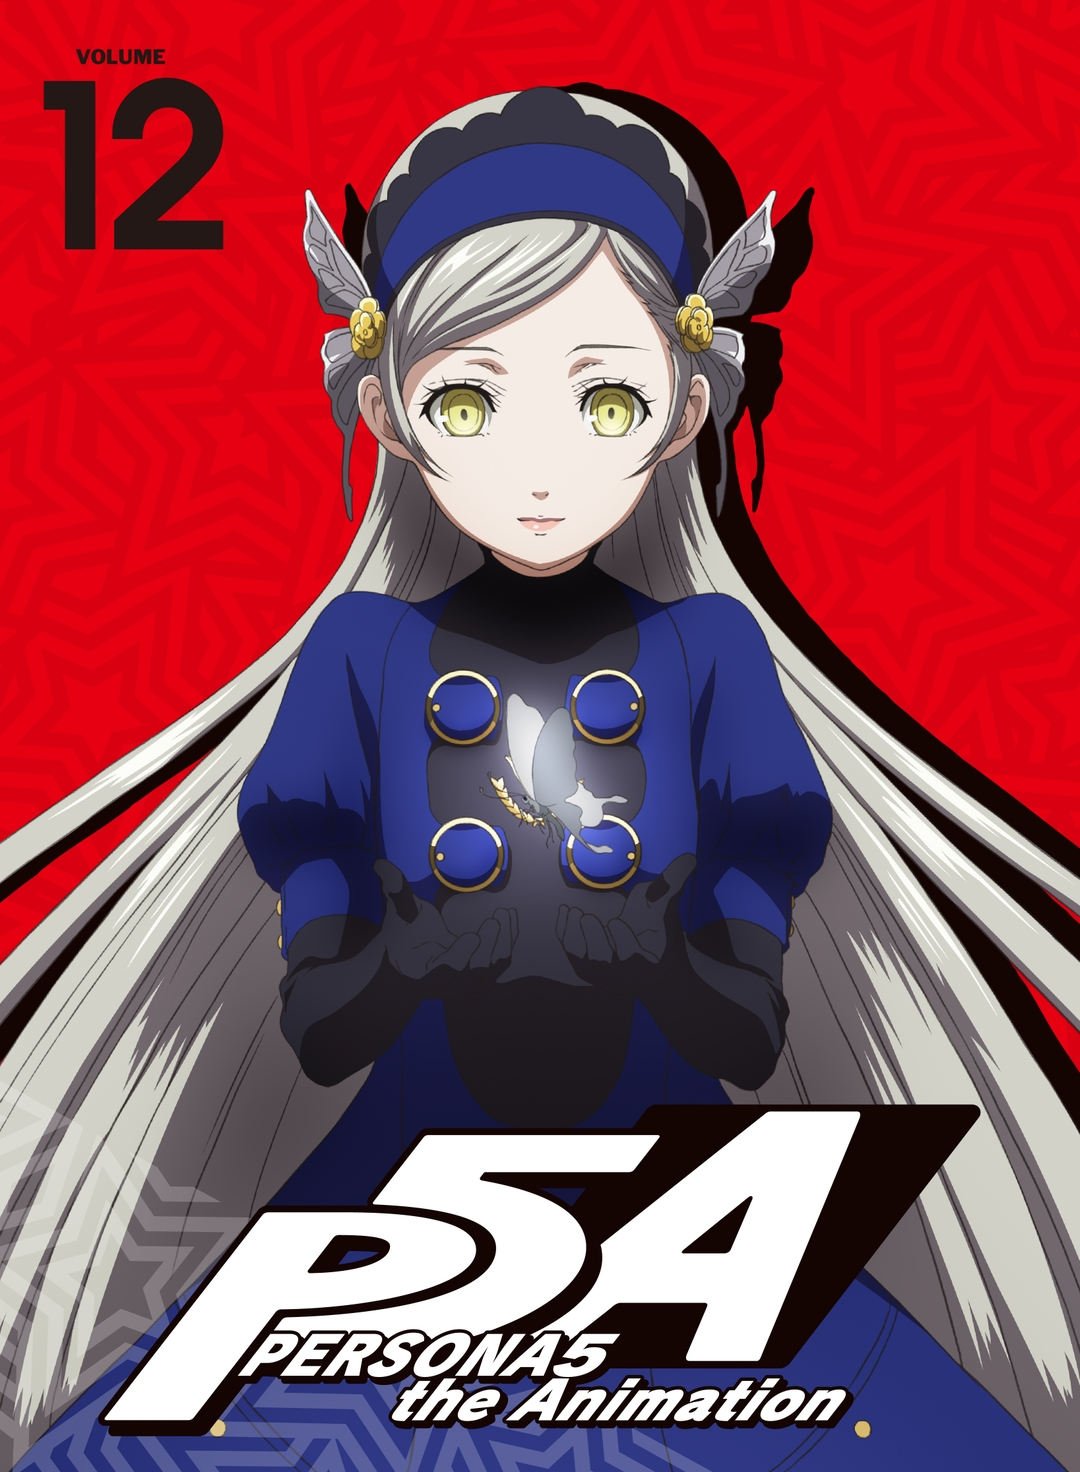 Persona Central On Twitter Persona 5 The Animation Volume 12 Cover Art Revealed Includes A Magical Valentine S Day Ova Https T Co 5gbzr2dwsn Https T Co Pv6bldrtum